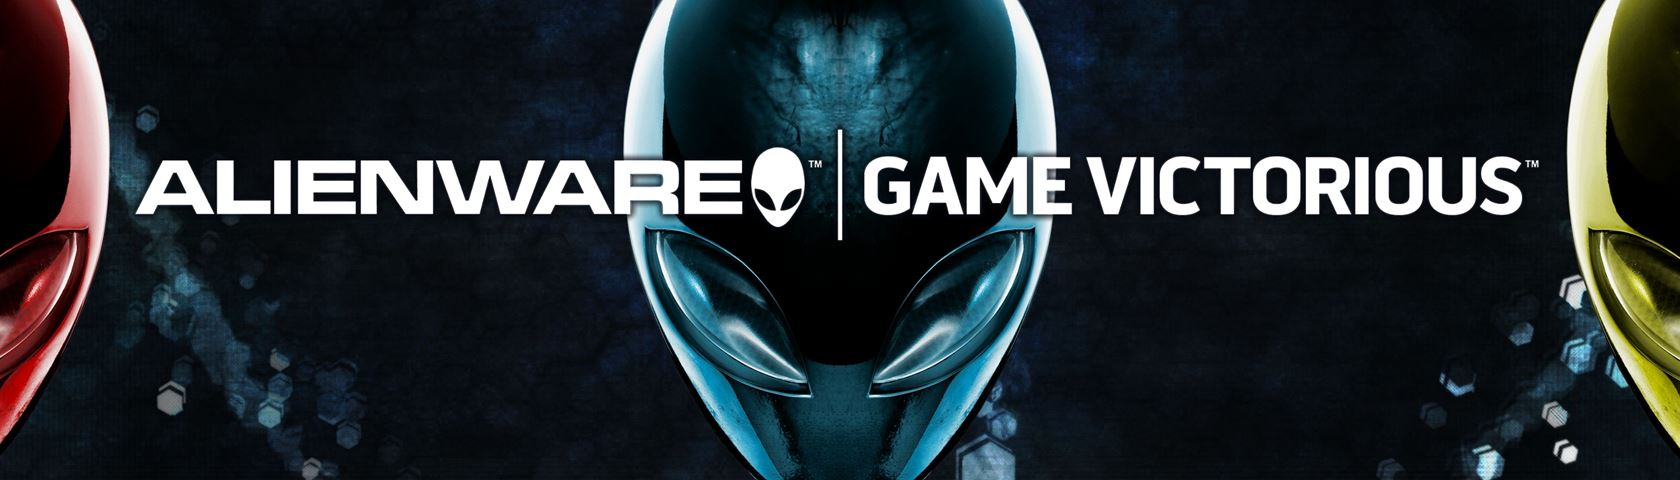 AlienWare Game Victorious